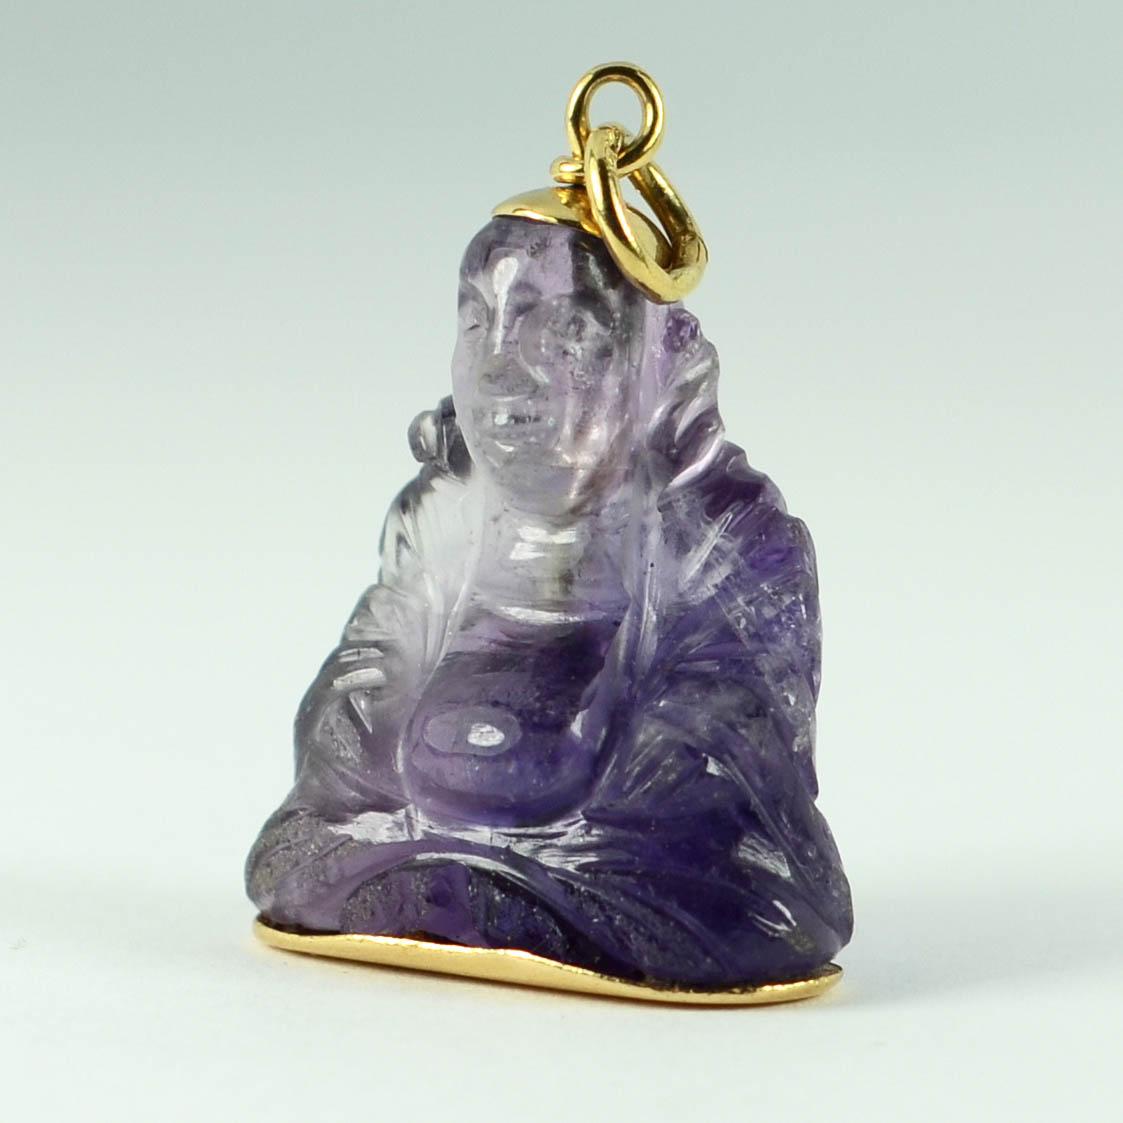 A charm pendant designed as a large carved Buddha sculpture in purple amethyst with 18 karat (18K) yellow gold terminals. Marked 750 to the jump ring for 18 karat gold.

Measurements: 3.1 x 2.2 x 1.4 cm (not including jump ring)
Weight: 8.68 grams